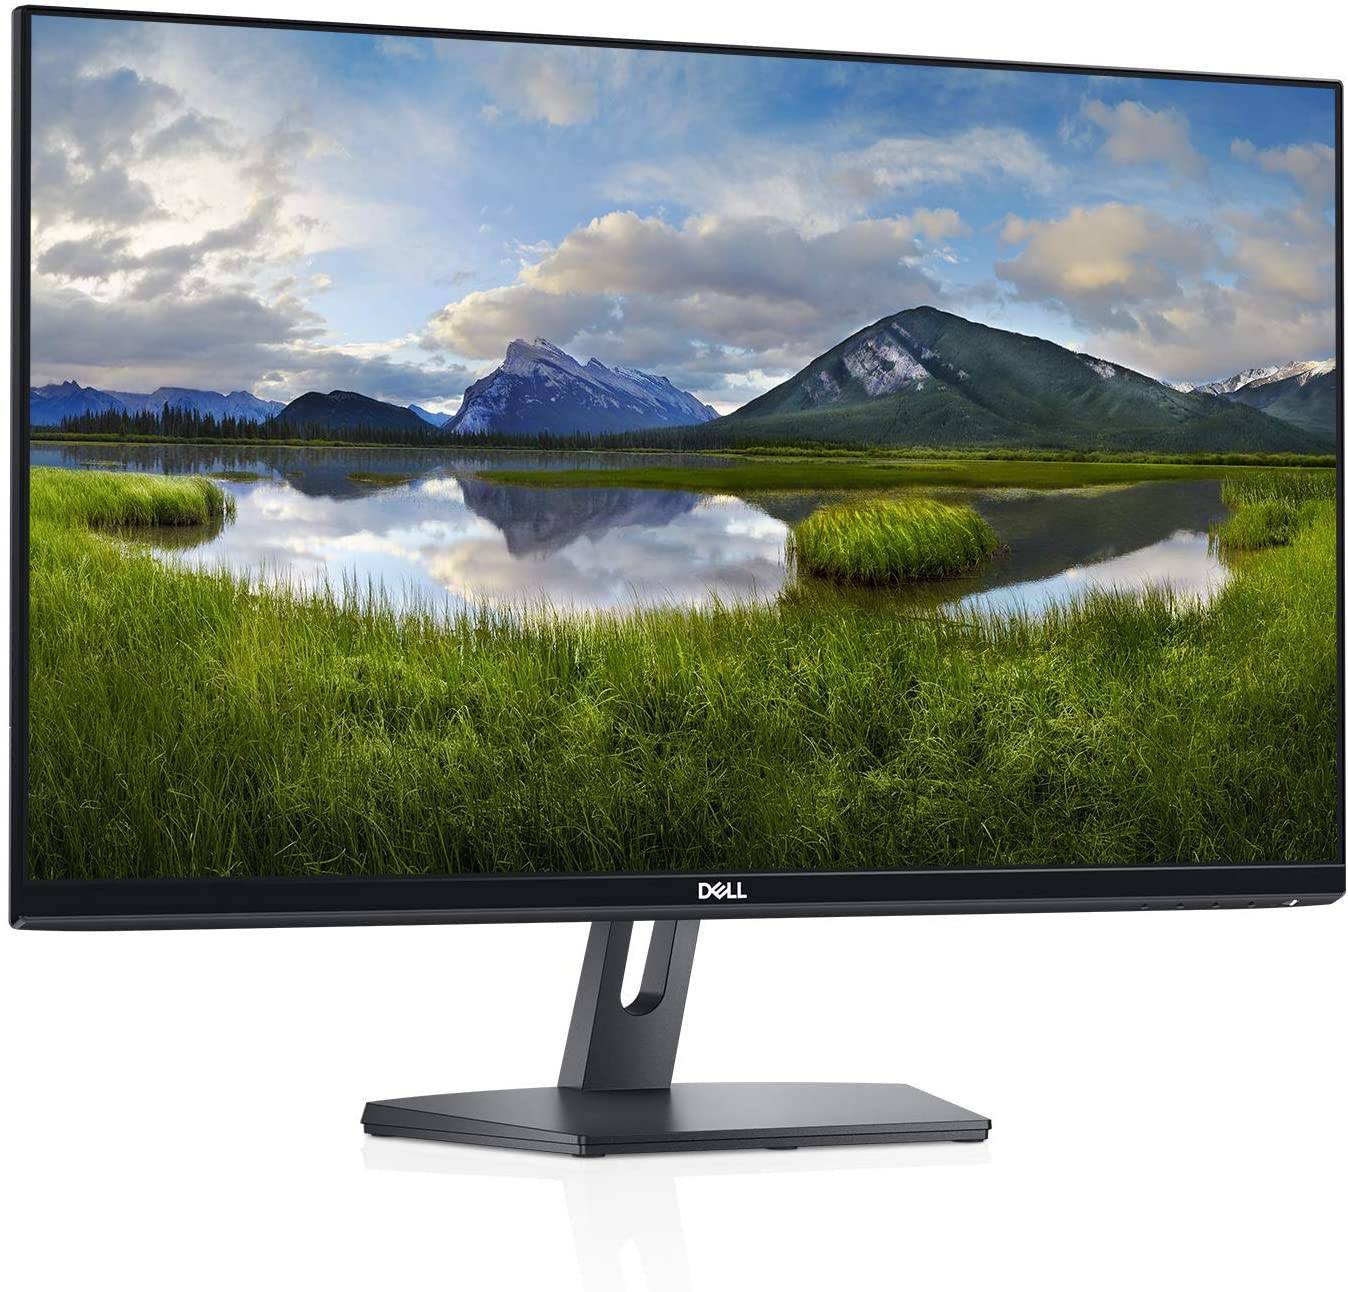 7. Dell SE2719HS-Best monitor for office work